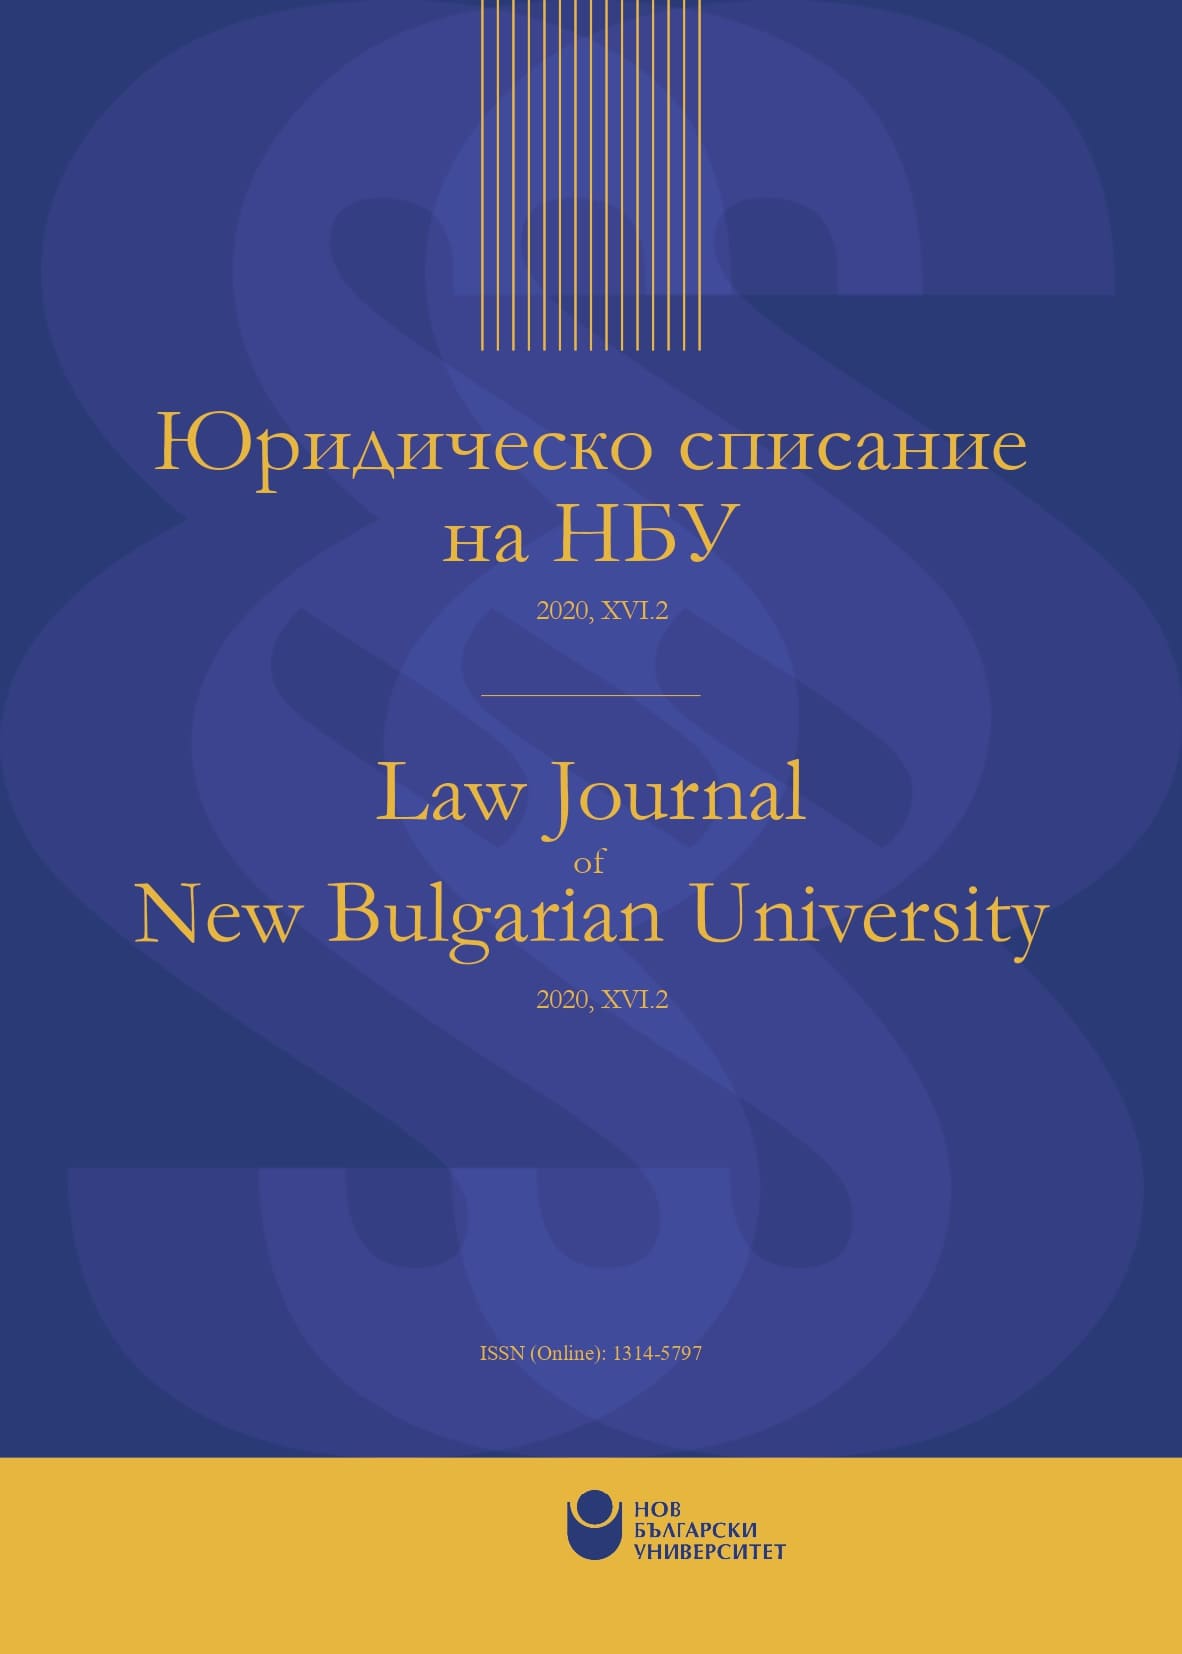 					View Vol. 16 No. 2 (2020): Law journal of New Bulgarian University
				